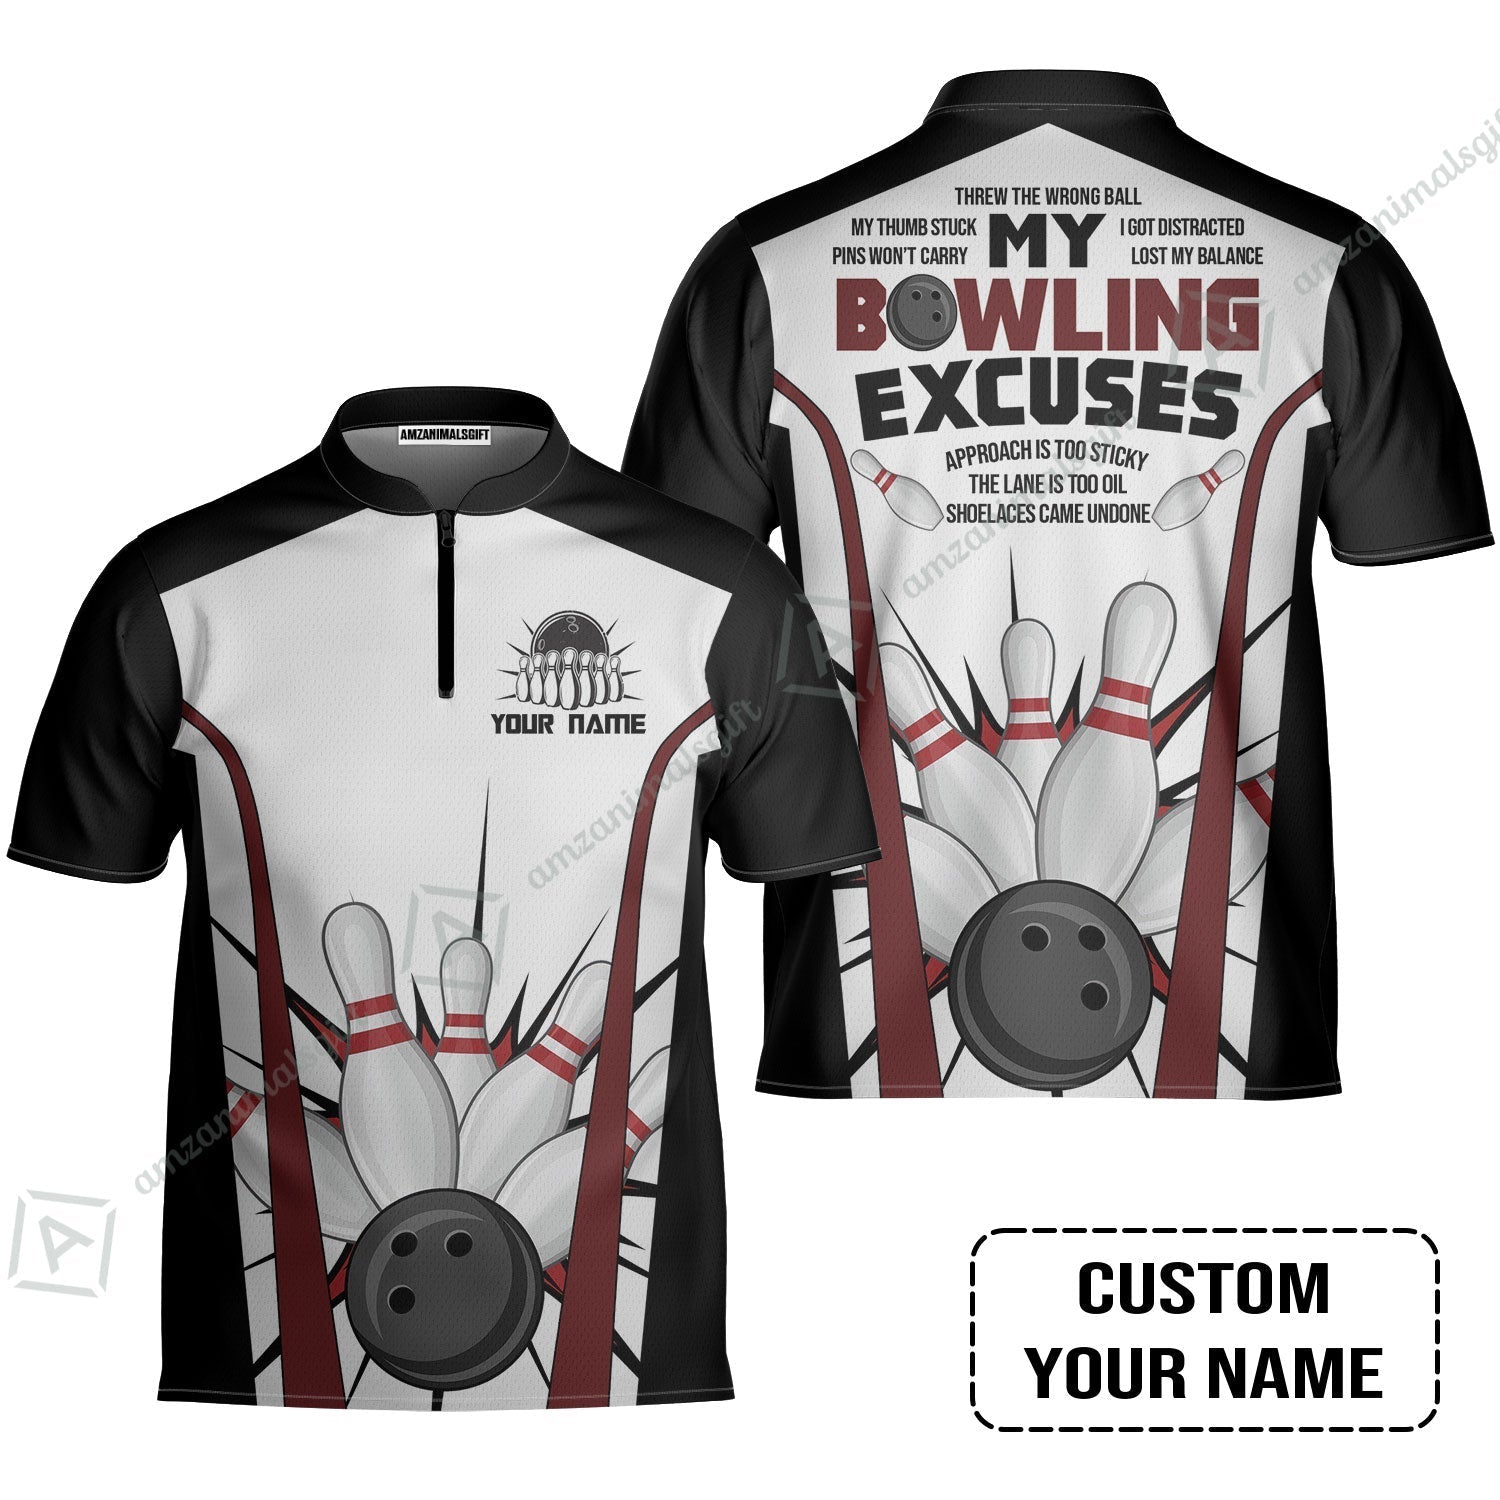 Bowling Custom Bowling Jersey - Custom Name Funny Bowling Jersey Personalized Bowling Polo Shirt - Gift For Friend, Family